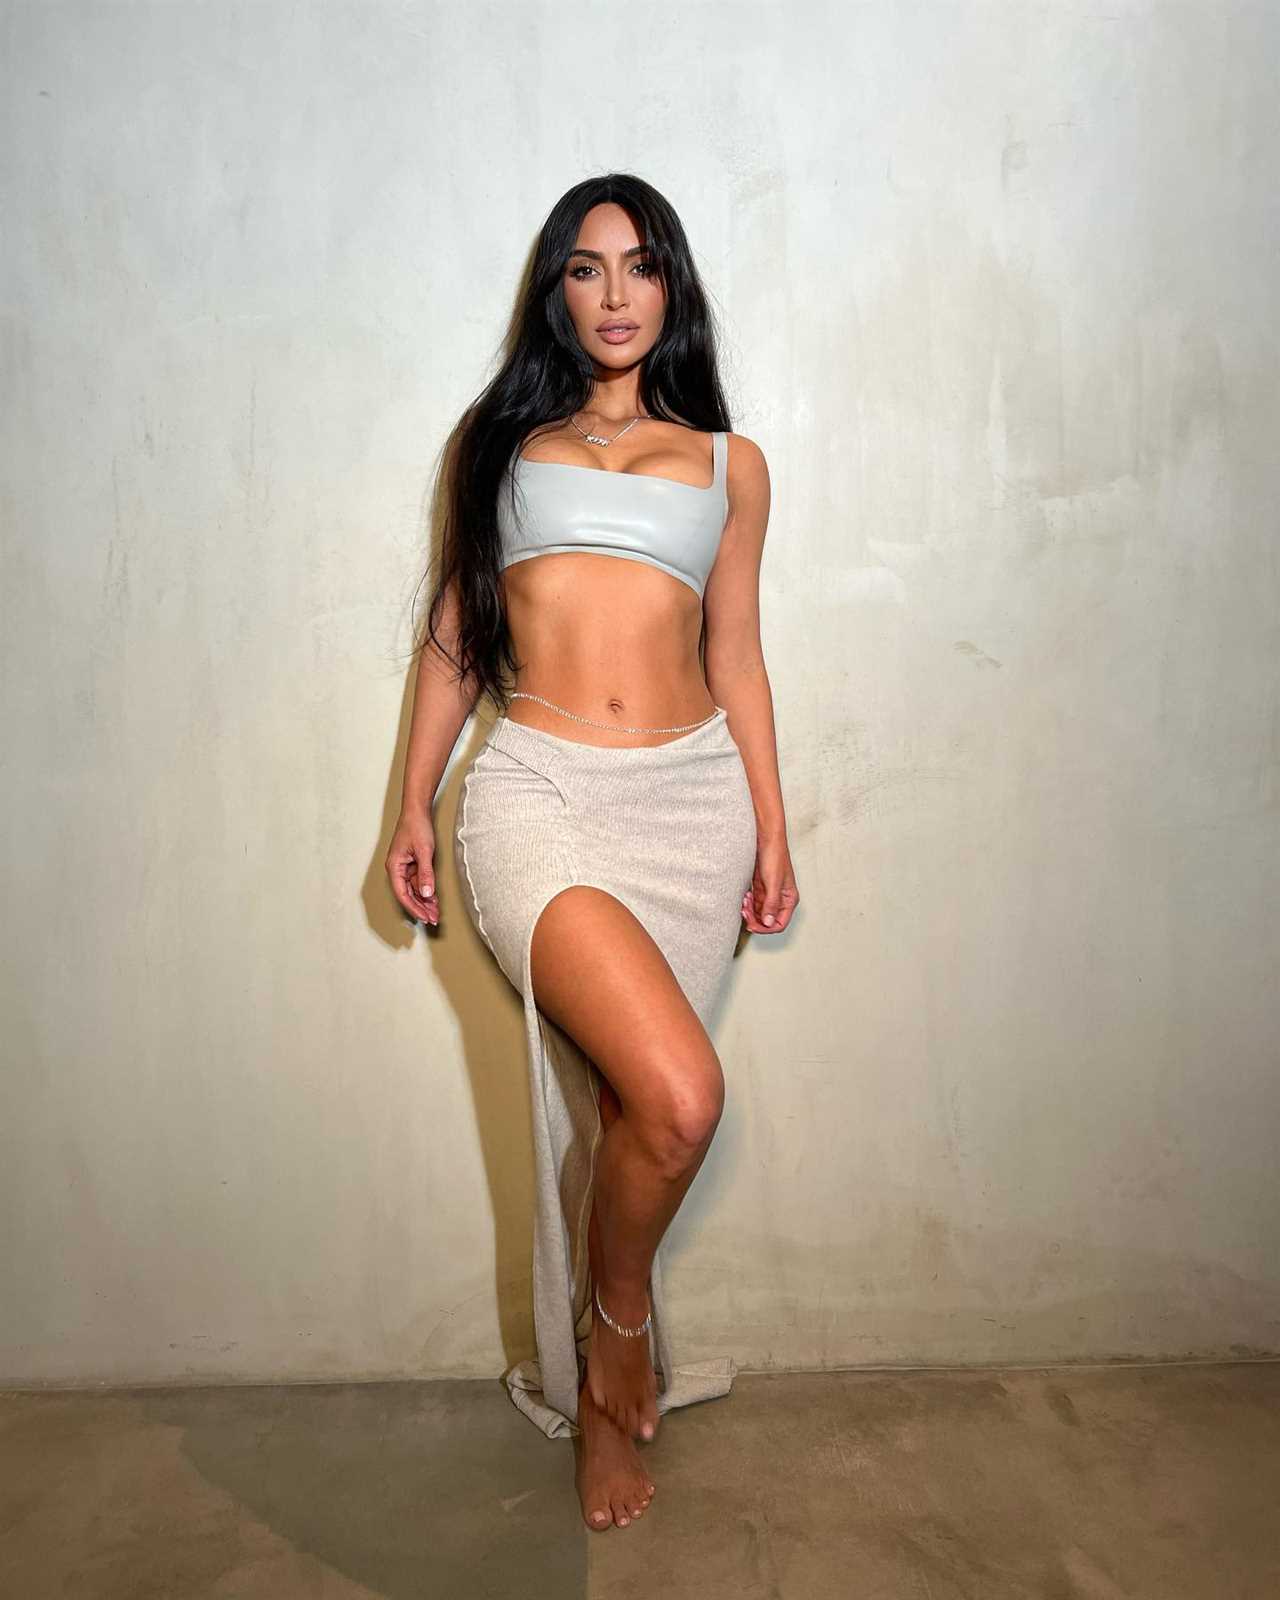 Kim Kardashian fans concerned after they think star’s ‘waist looks thinner than her face’ in troubling new photo